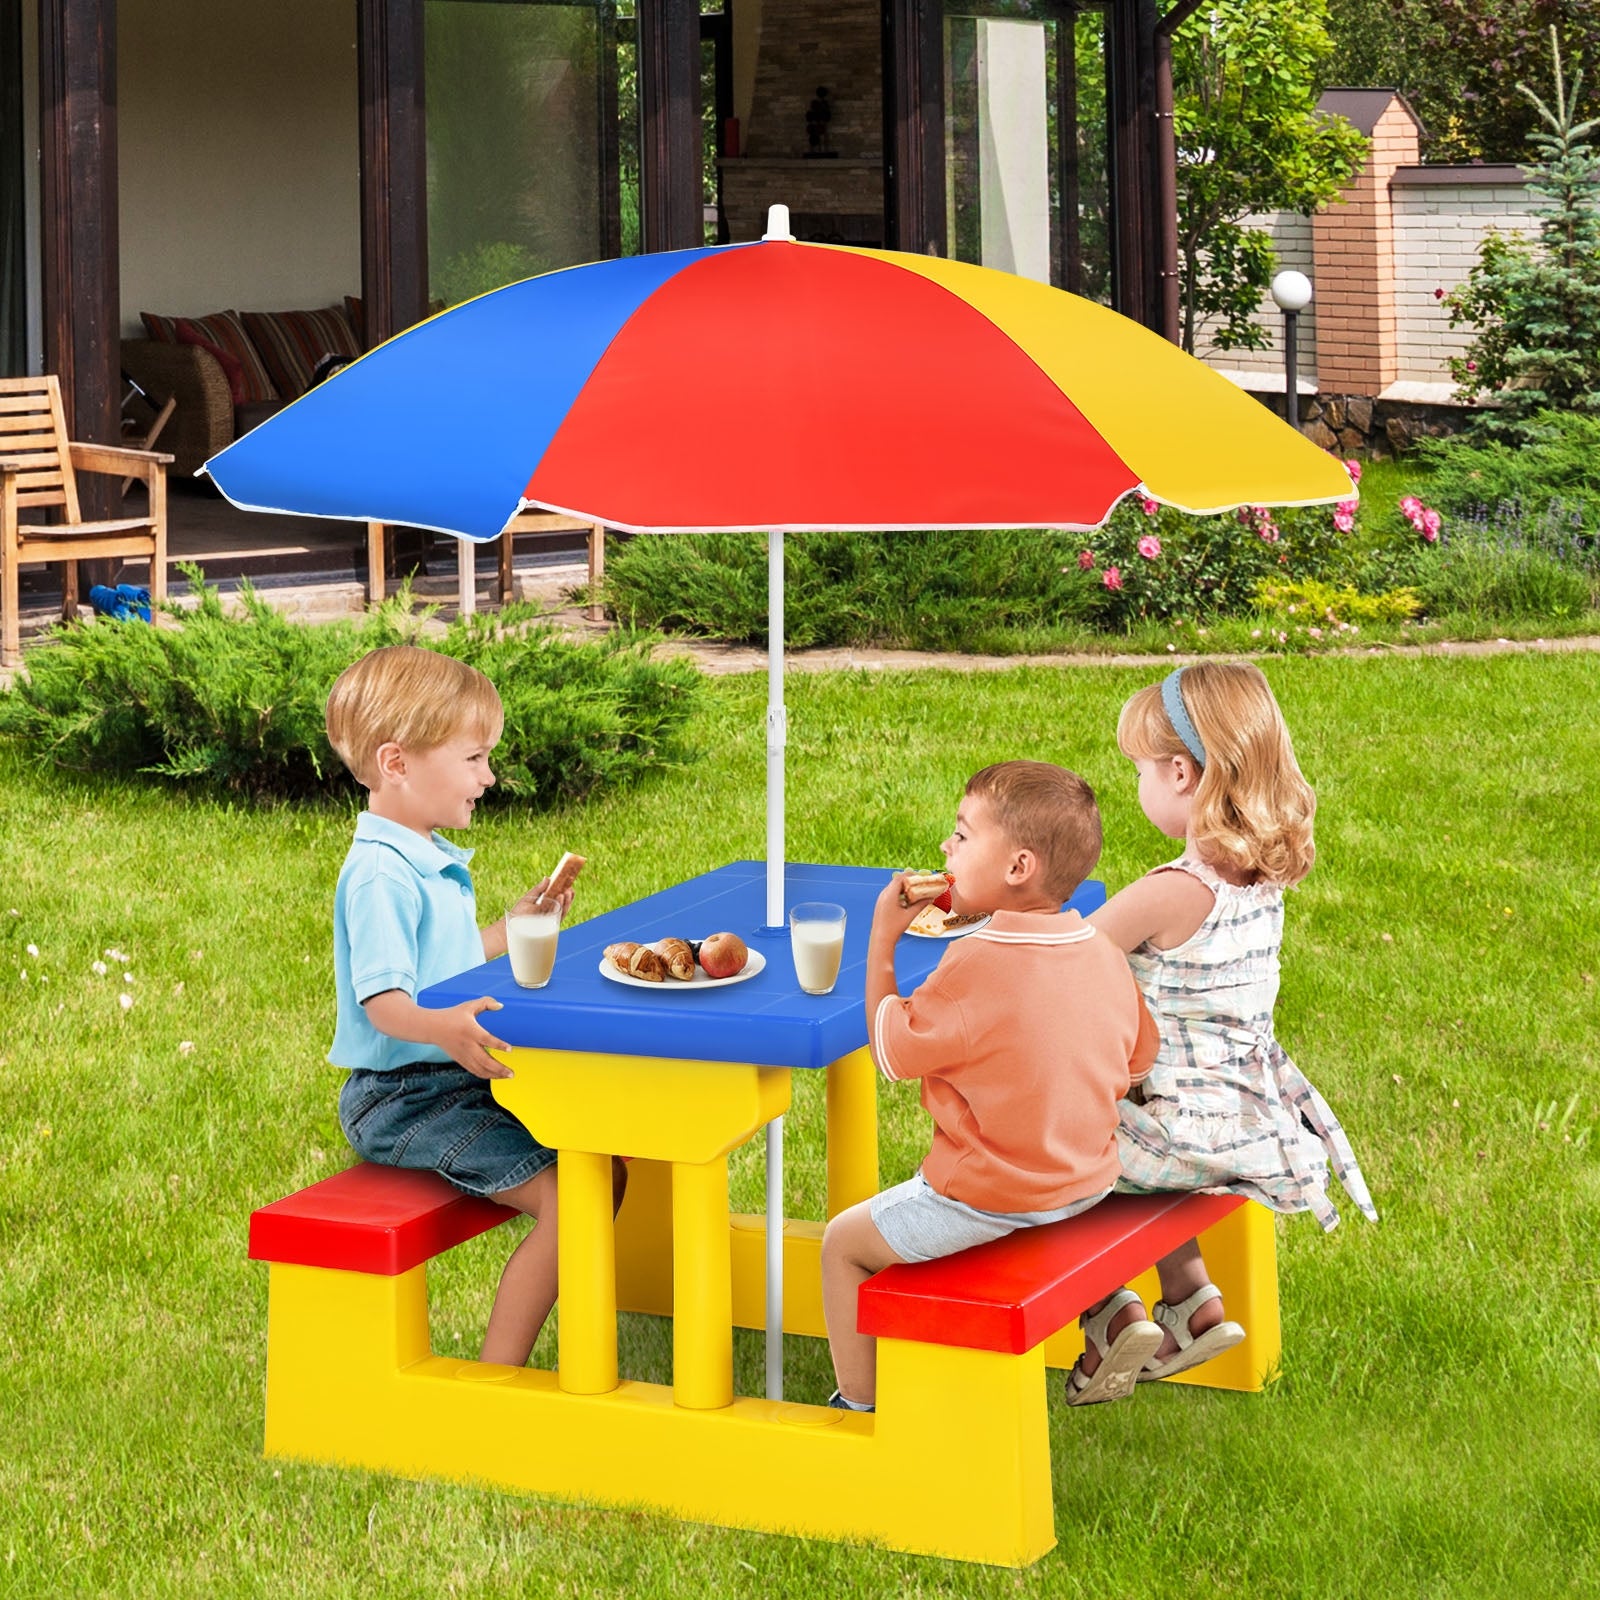 Colorful Exterior and Perfect Size for Kids: With its vibrant and colorful exterior, spacious desktop, and two benches with four seats, this picnic table is perfectly sized for kids. Each bench can support up to 110 pounds, making it suitable for small groups of children. It offers an ideal setting for creating joyful memories and fostering social interaction among kids and their friends.